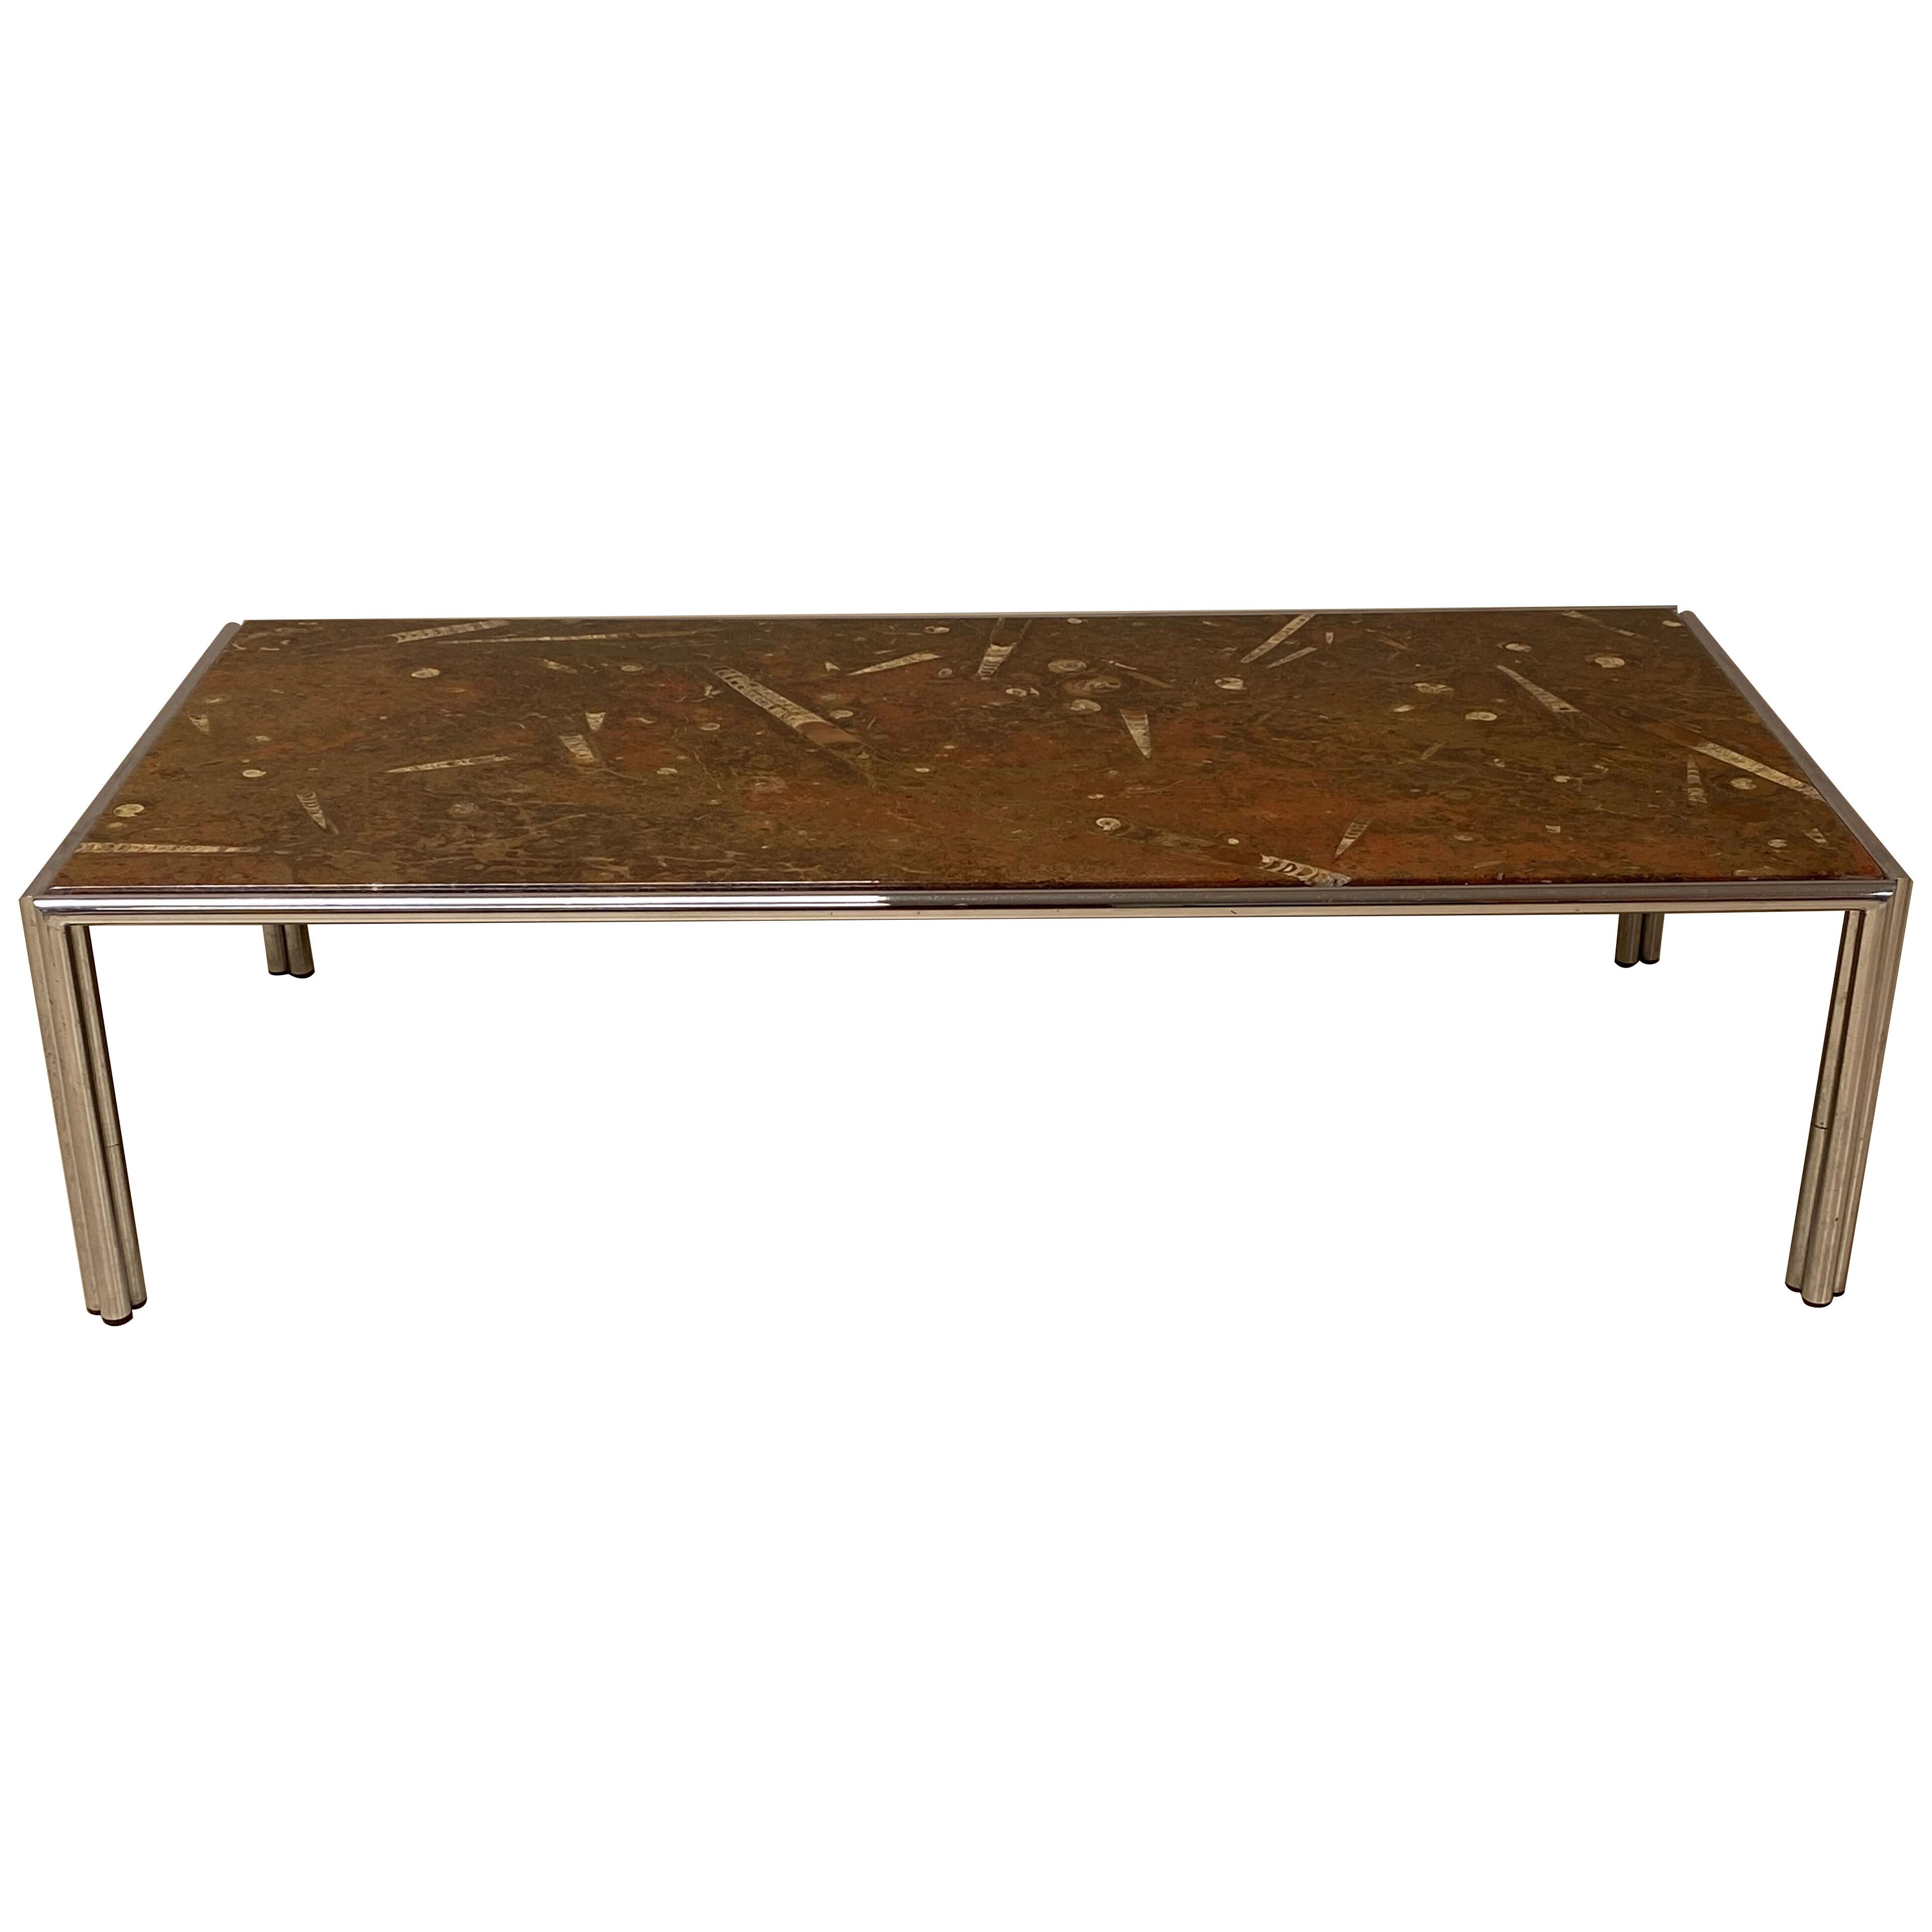 Vintage Coffee Table With Fossilized Top